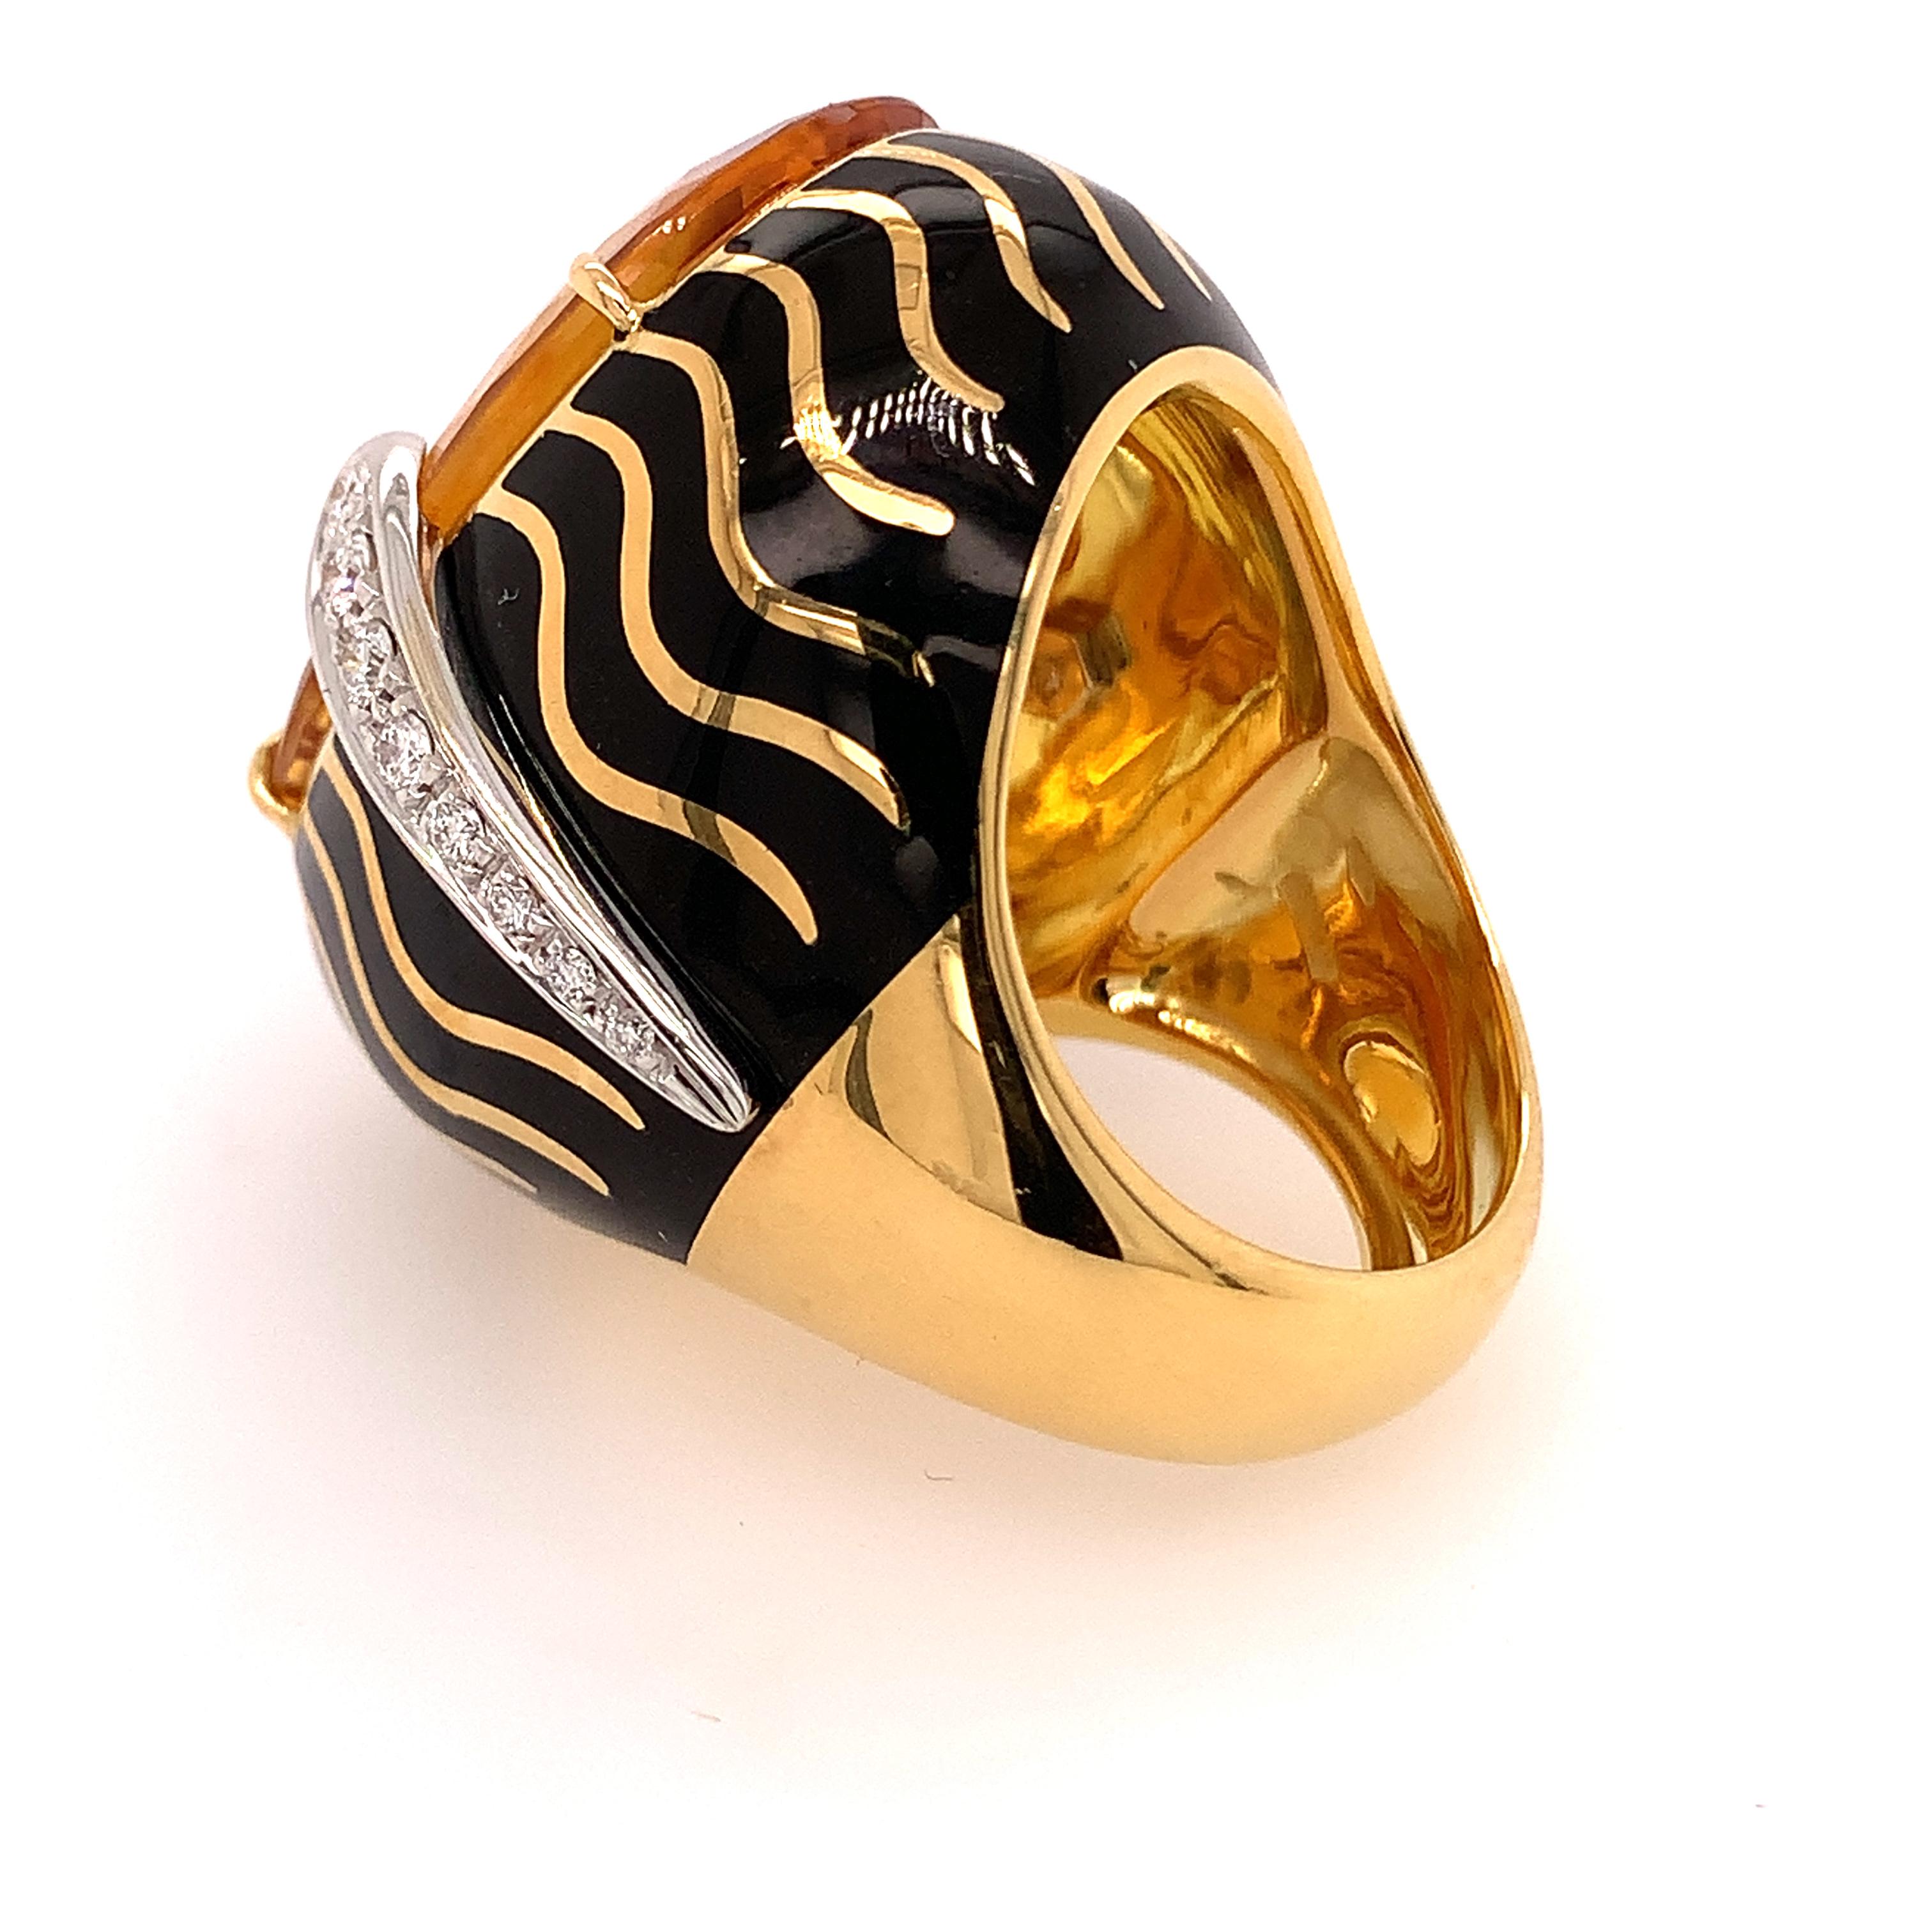 Round Cut 18kt Gold One of a Kind Ring with 29.15 Ct Citrine and Diamonds, Animalier Look